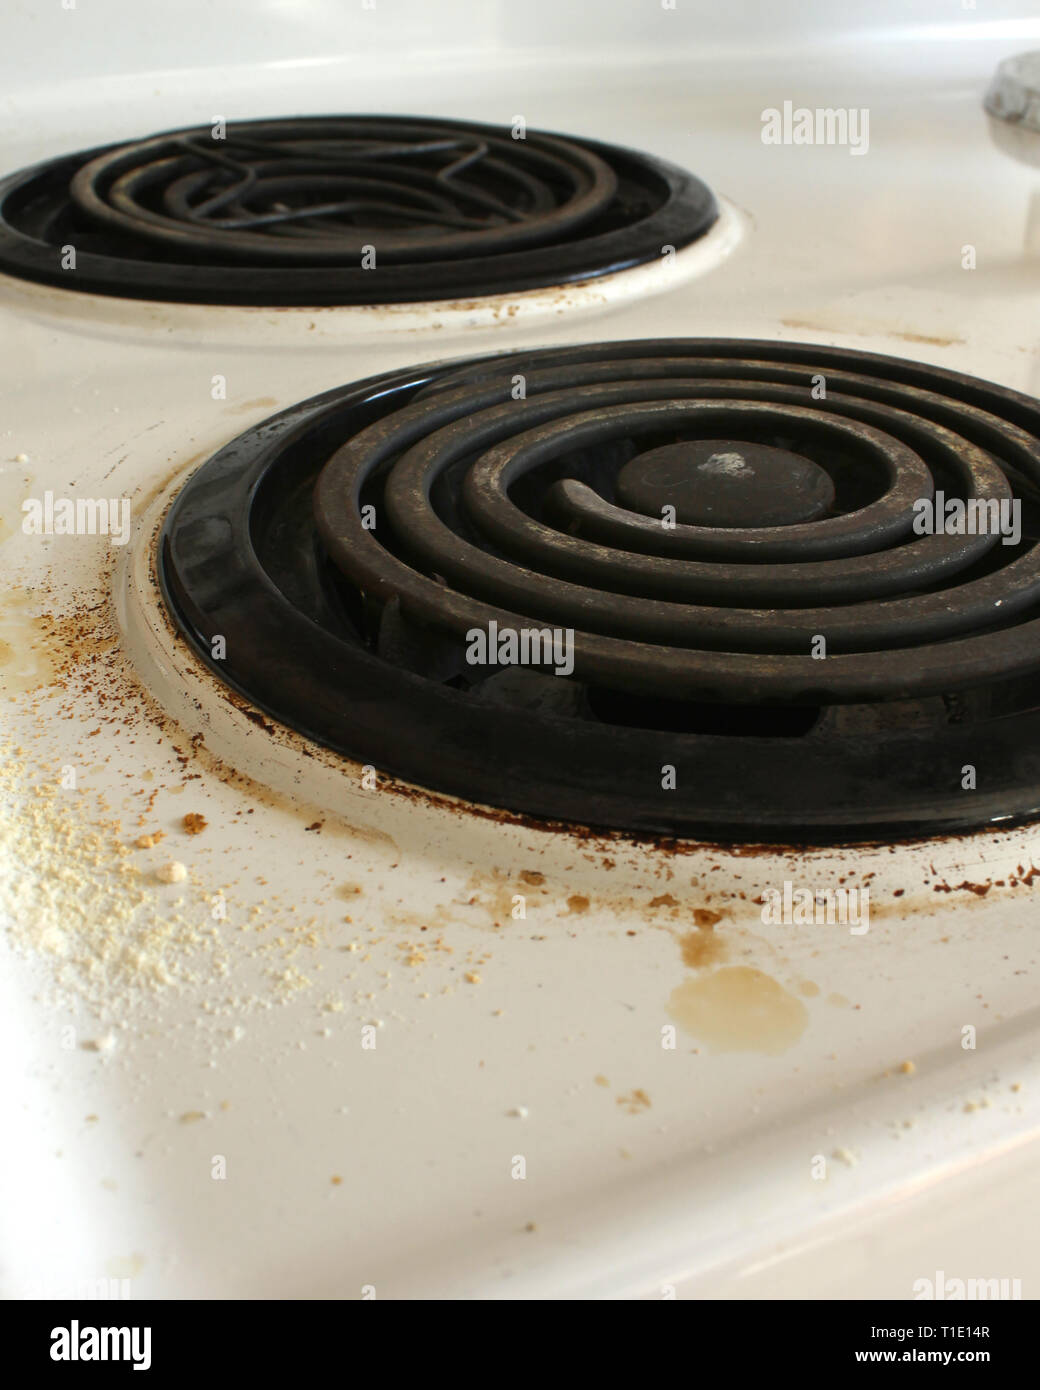 https://c8.alamy.com/comp/T1E14R/dirty-and-beat-up-coil-stove-top-T1E14R.jpg